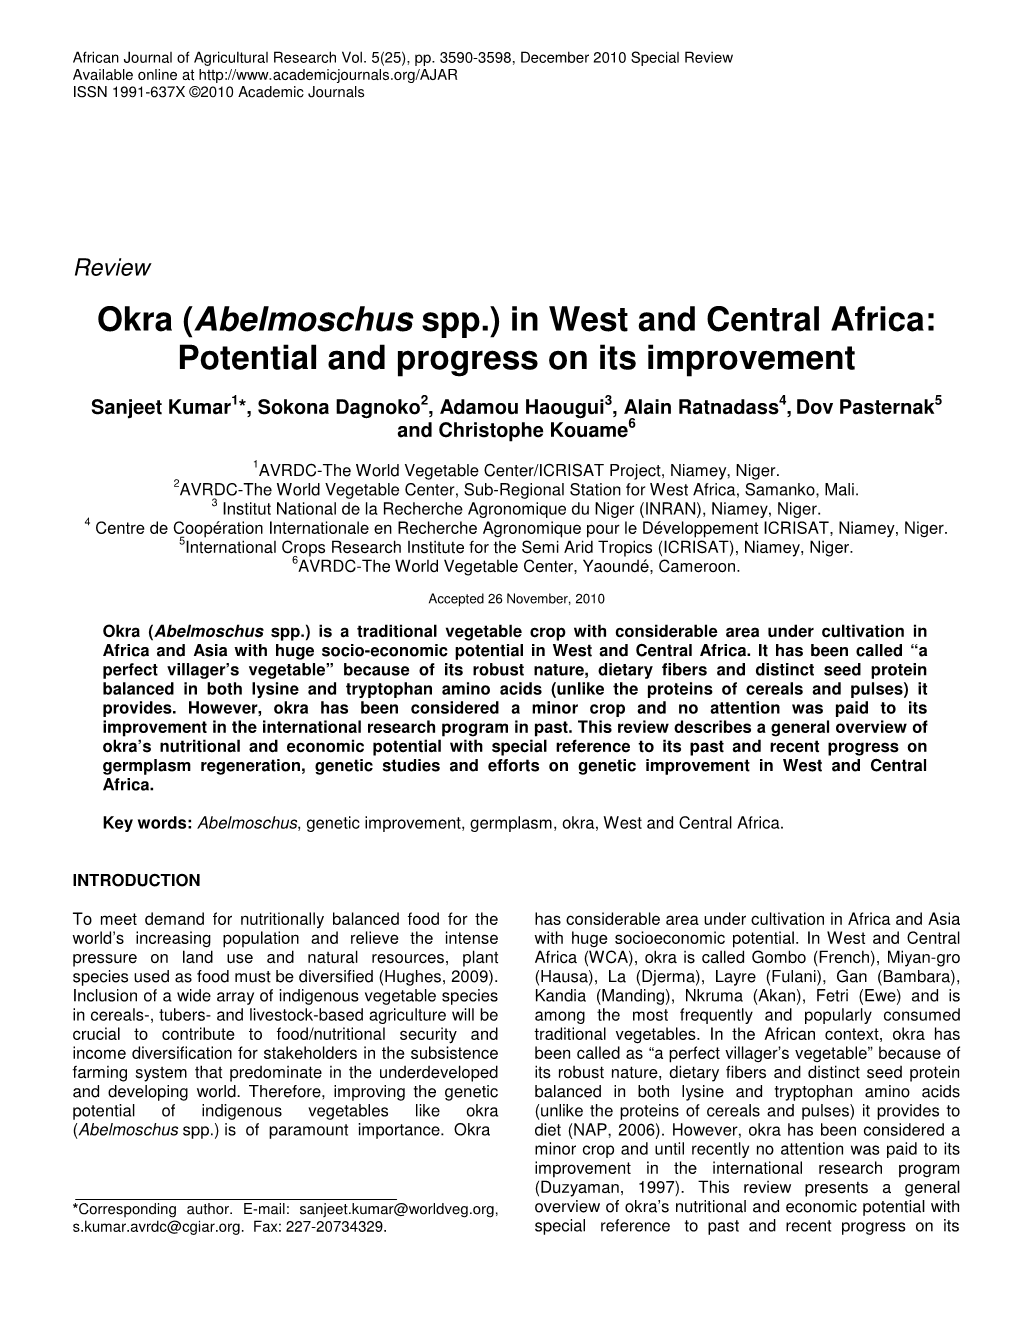 Okra (Abelmoschus Spp.) in West and Central Africa: Potential and Progress on Its Improvement